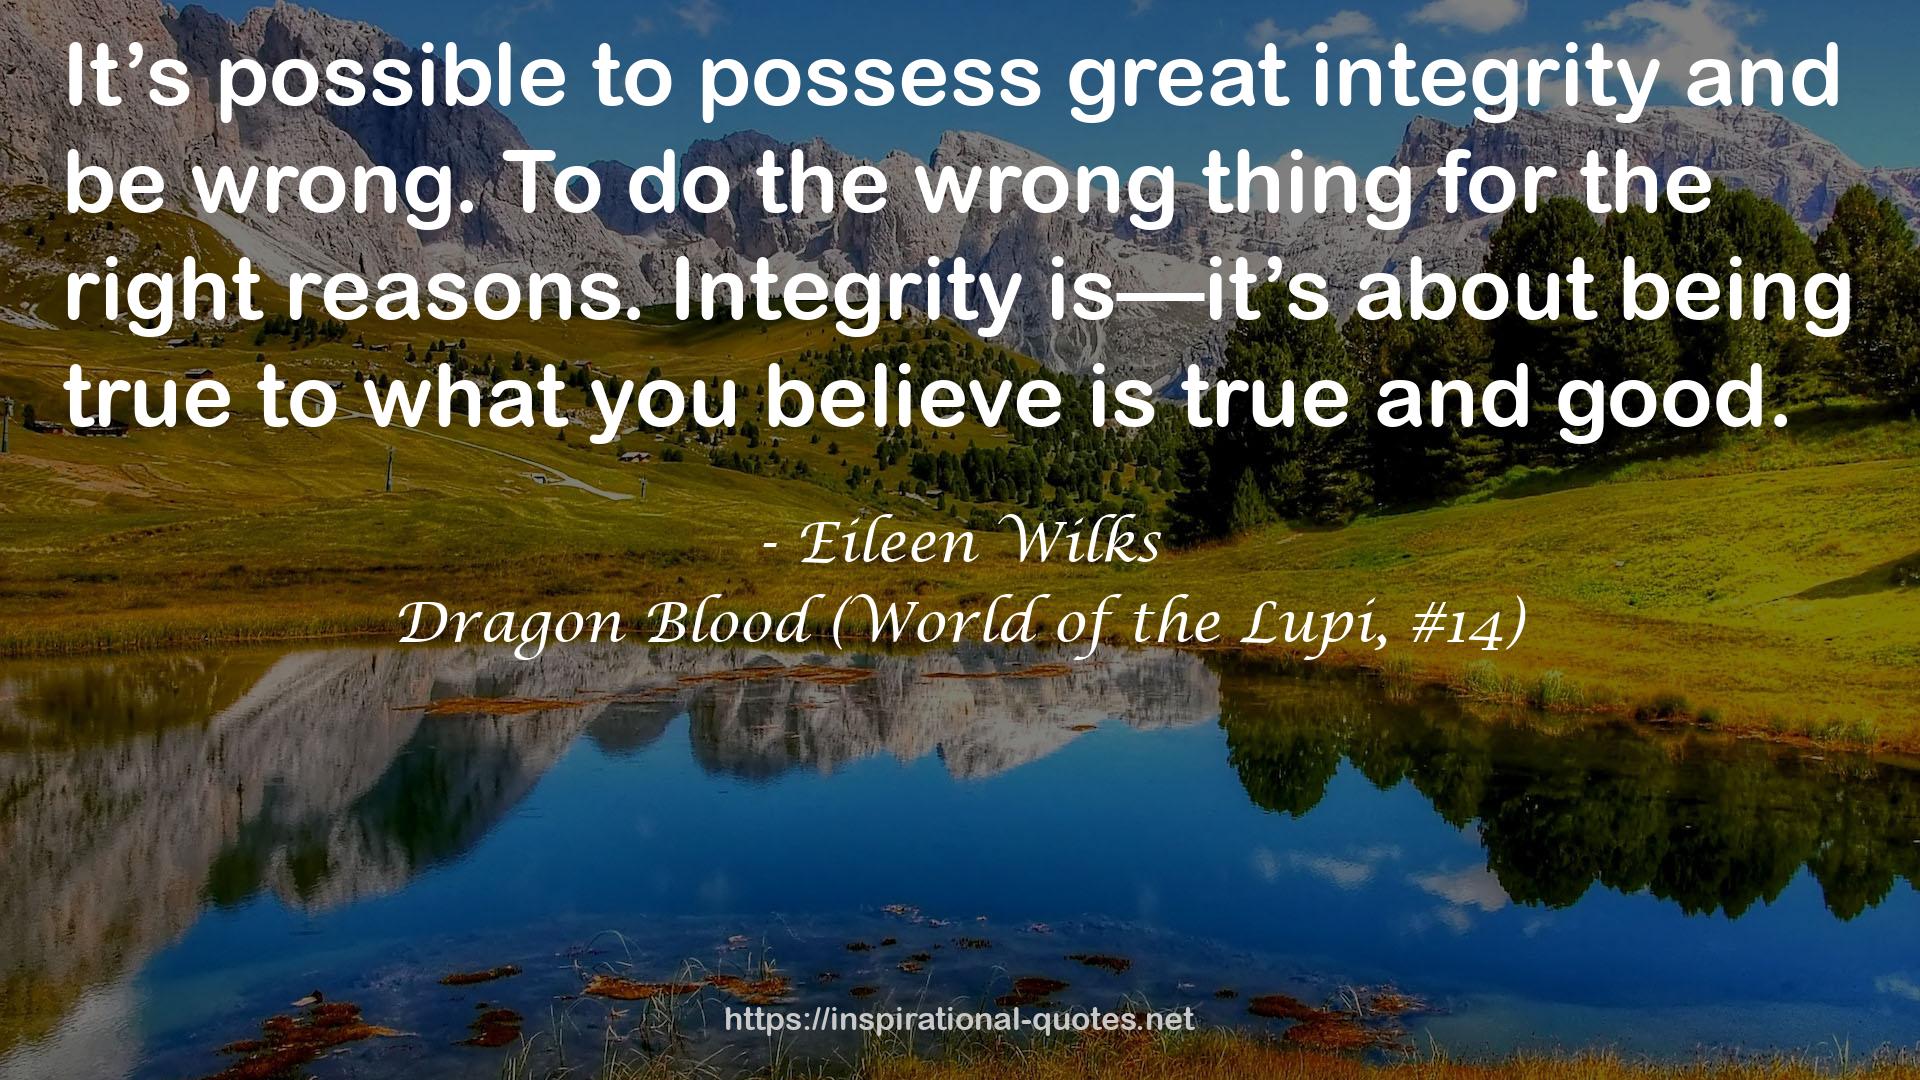 Dragon Blood (World of the Lupi, #14) QUOTES